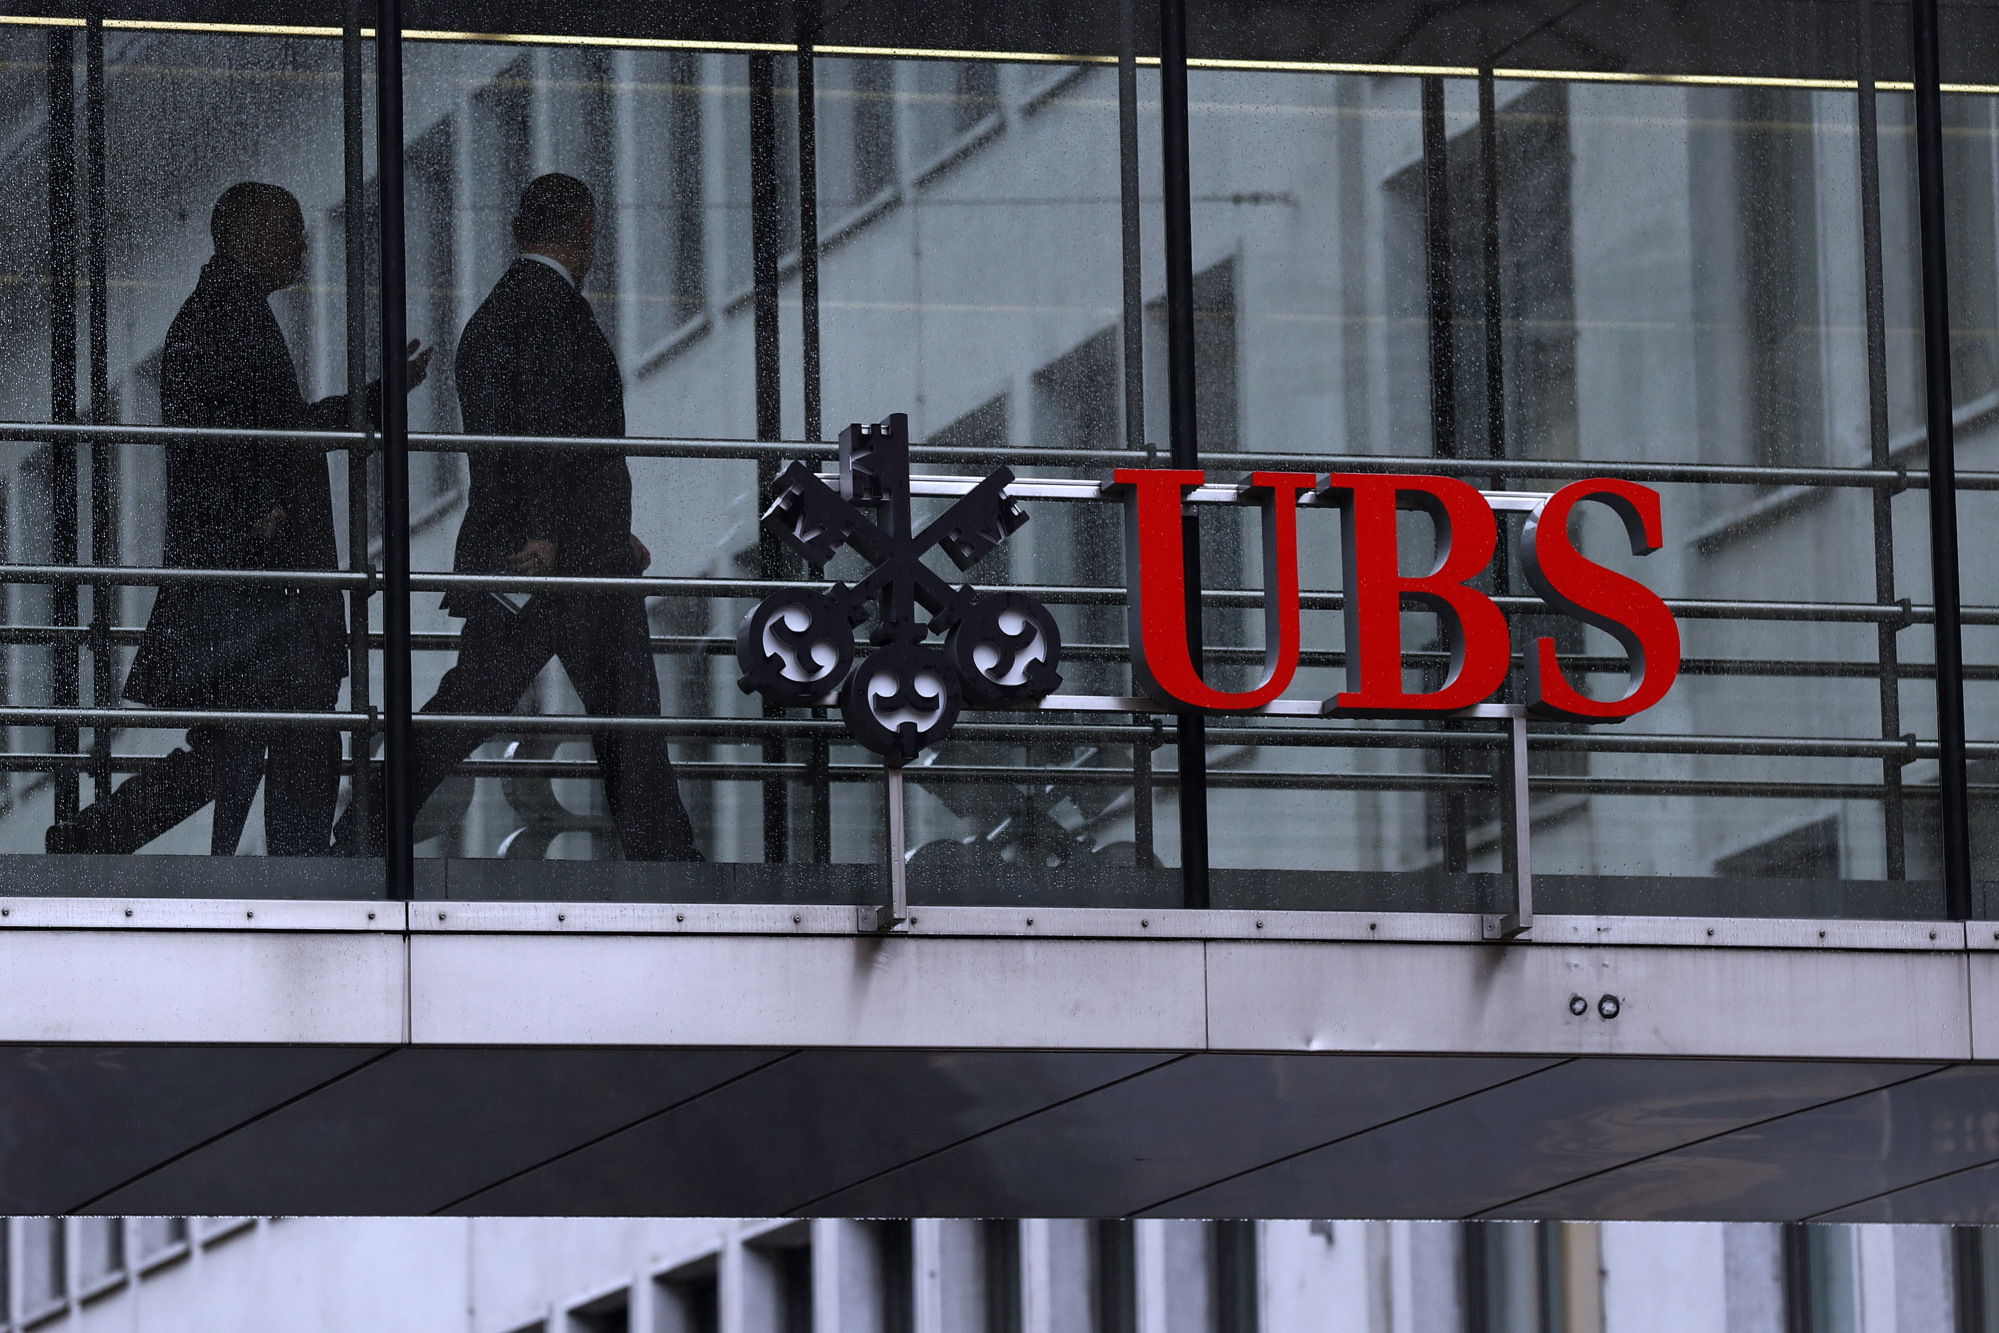 Employees pass between offices as UBS Group AG logo sits on a walkway at the UBS headquarters in Zurich, Switzerland, on Monday, Jan. 22, 2018. A UBS loan backed by shares of Steinhoff International Holdings NV was to blame for the majority of the Swiss bank’s 79 million francs ($82 million) in credit losses in the fourth quarter, a person with knowledge of the matter said.